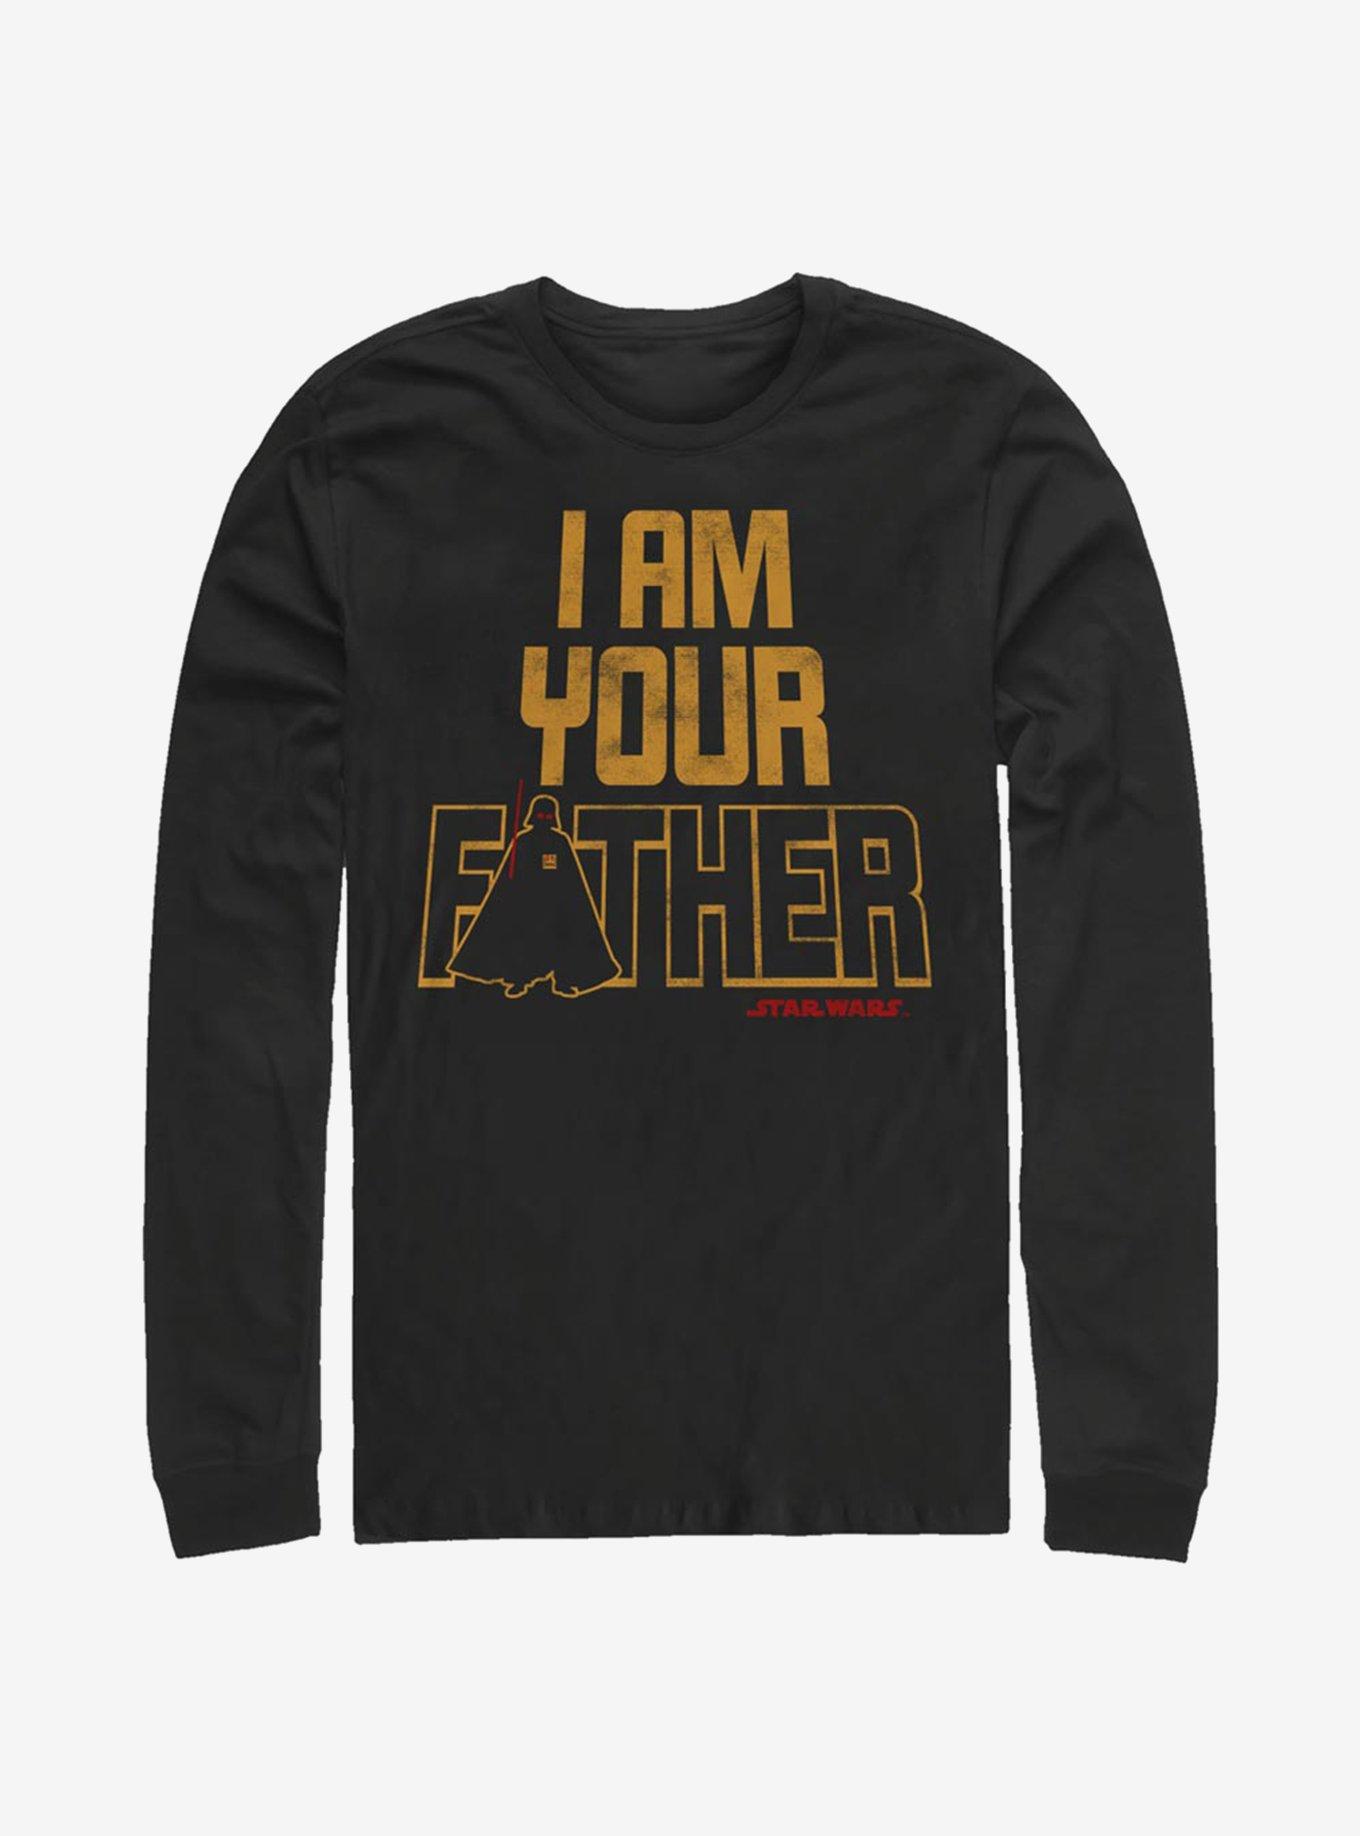 Star Wars Father Time Long-Sleeve T-Shirt, BLACK, hi-res